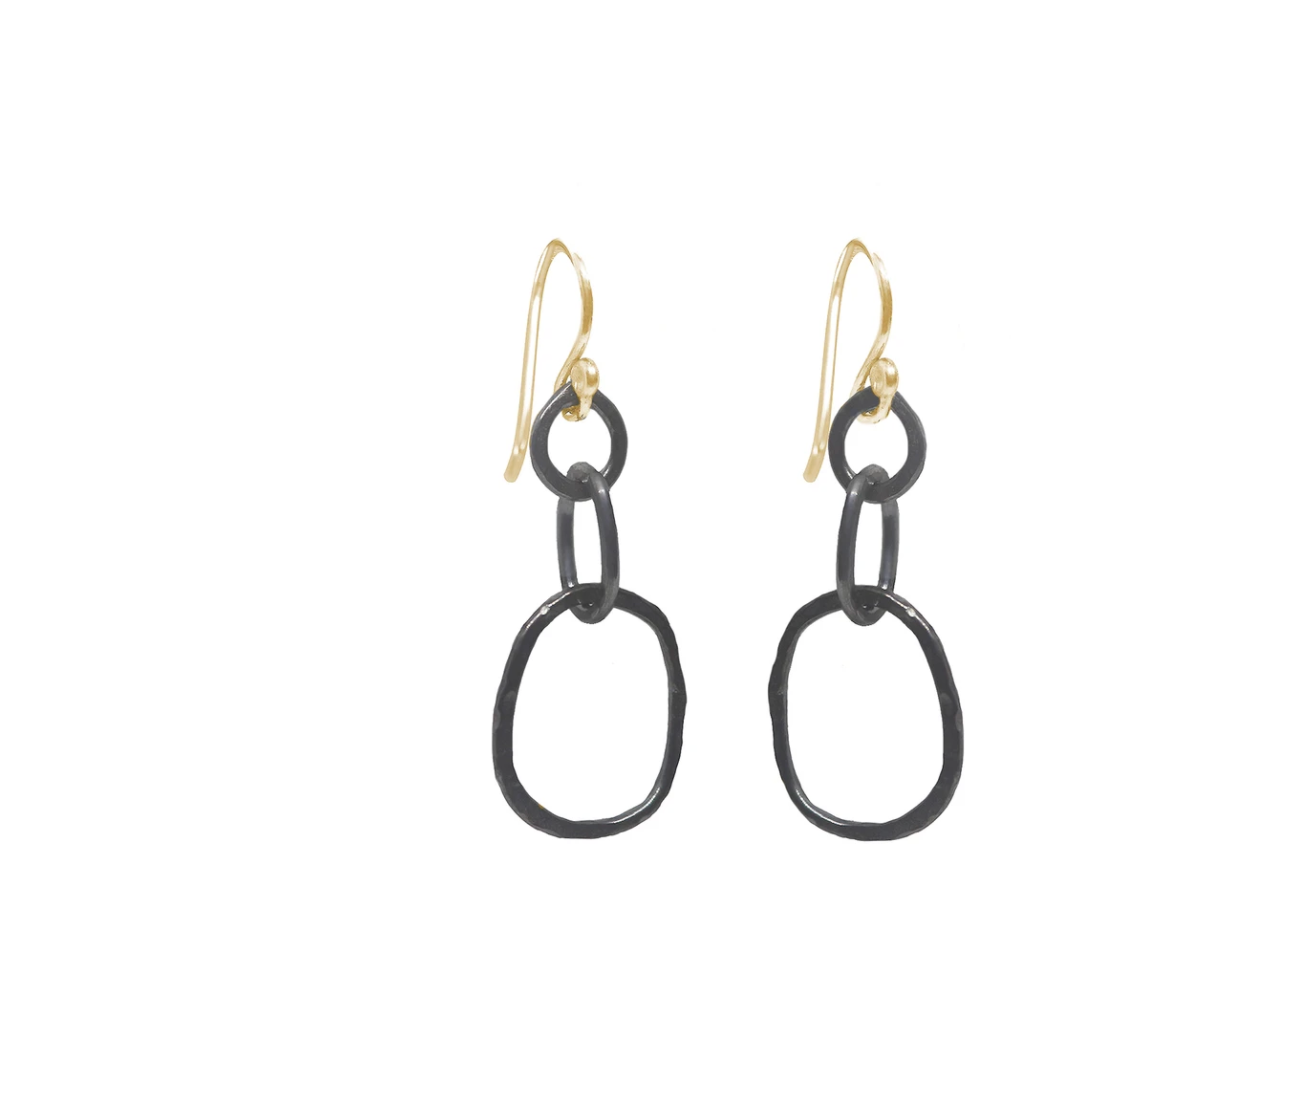 Large Oxidized Organic Link Earrings with Gold fill earwires